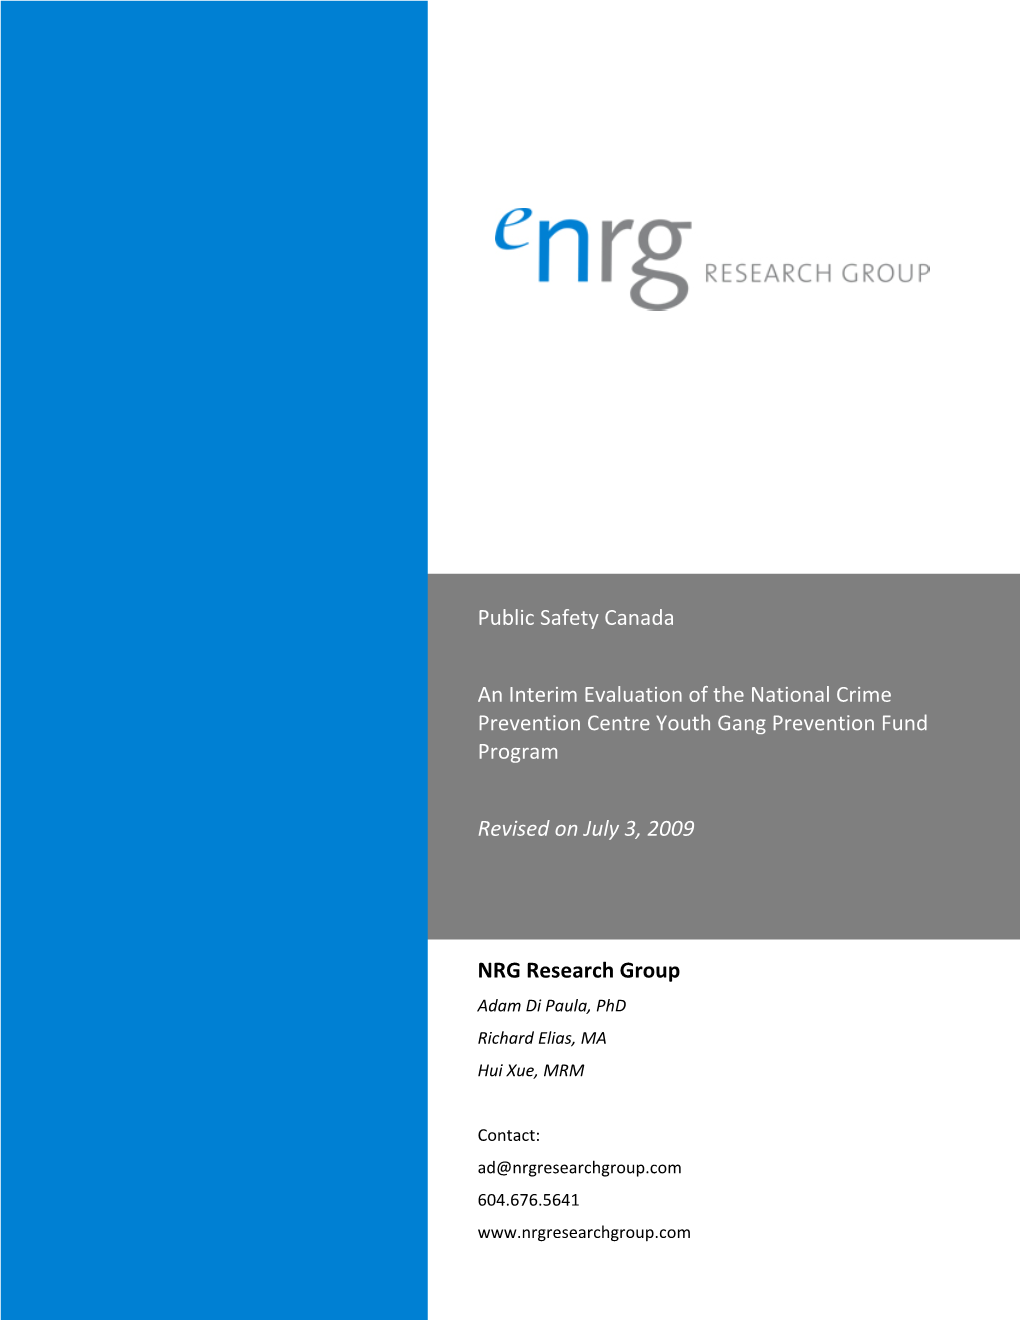 NRG Research Group Public Safety Canada an Interim Evaluation Of